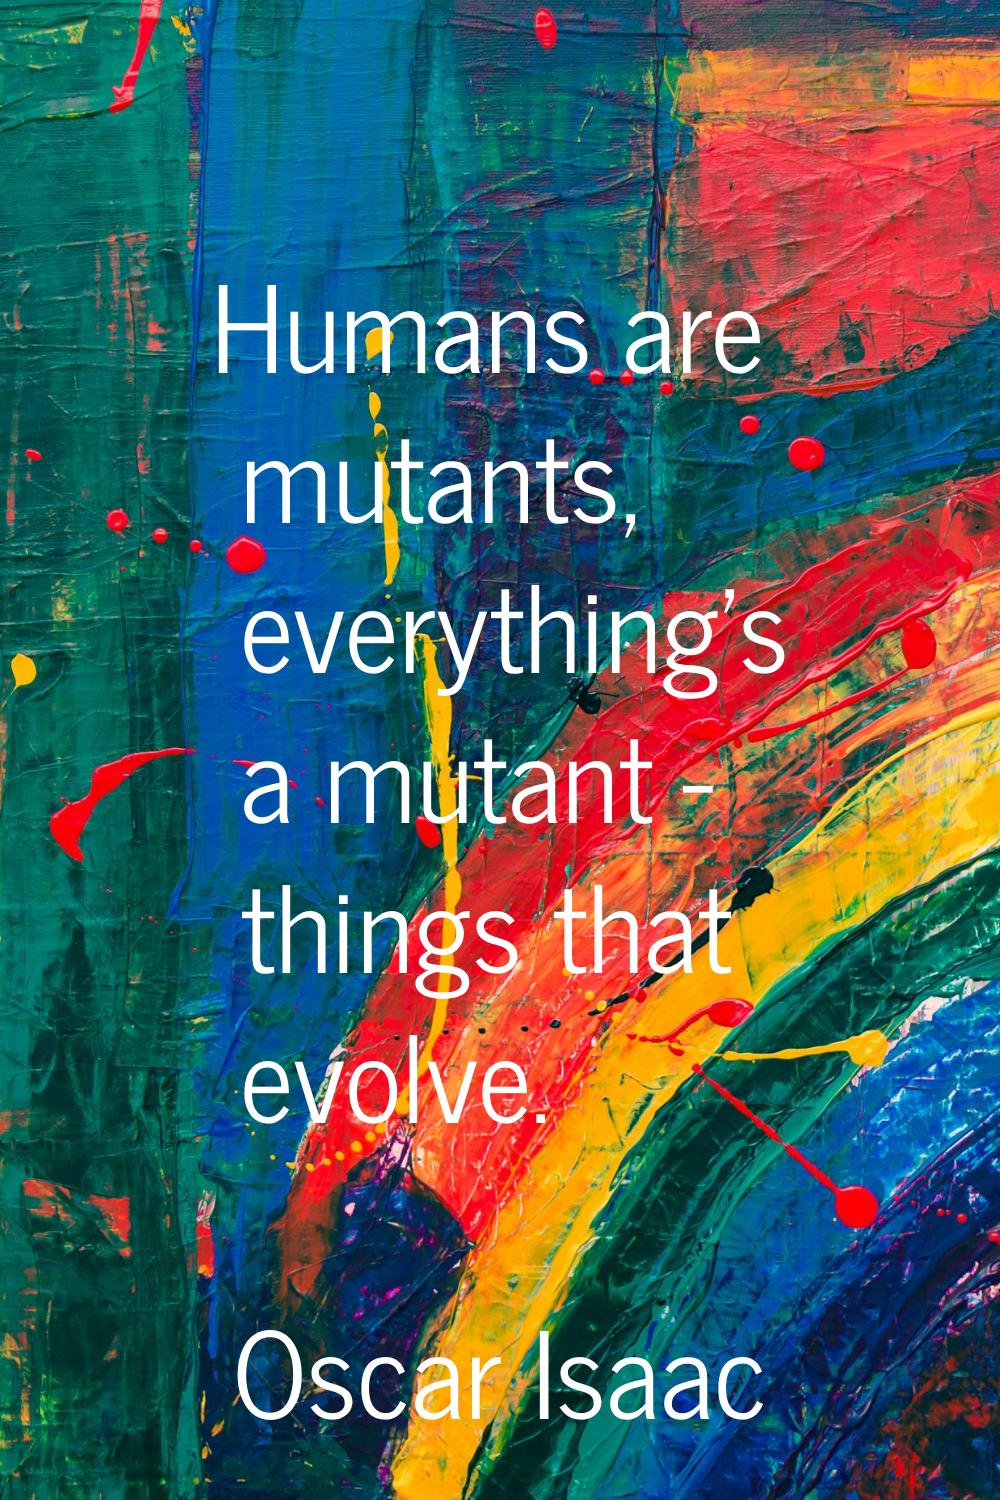 Humans are mutants, everything's a mutant - things that evolve.